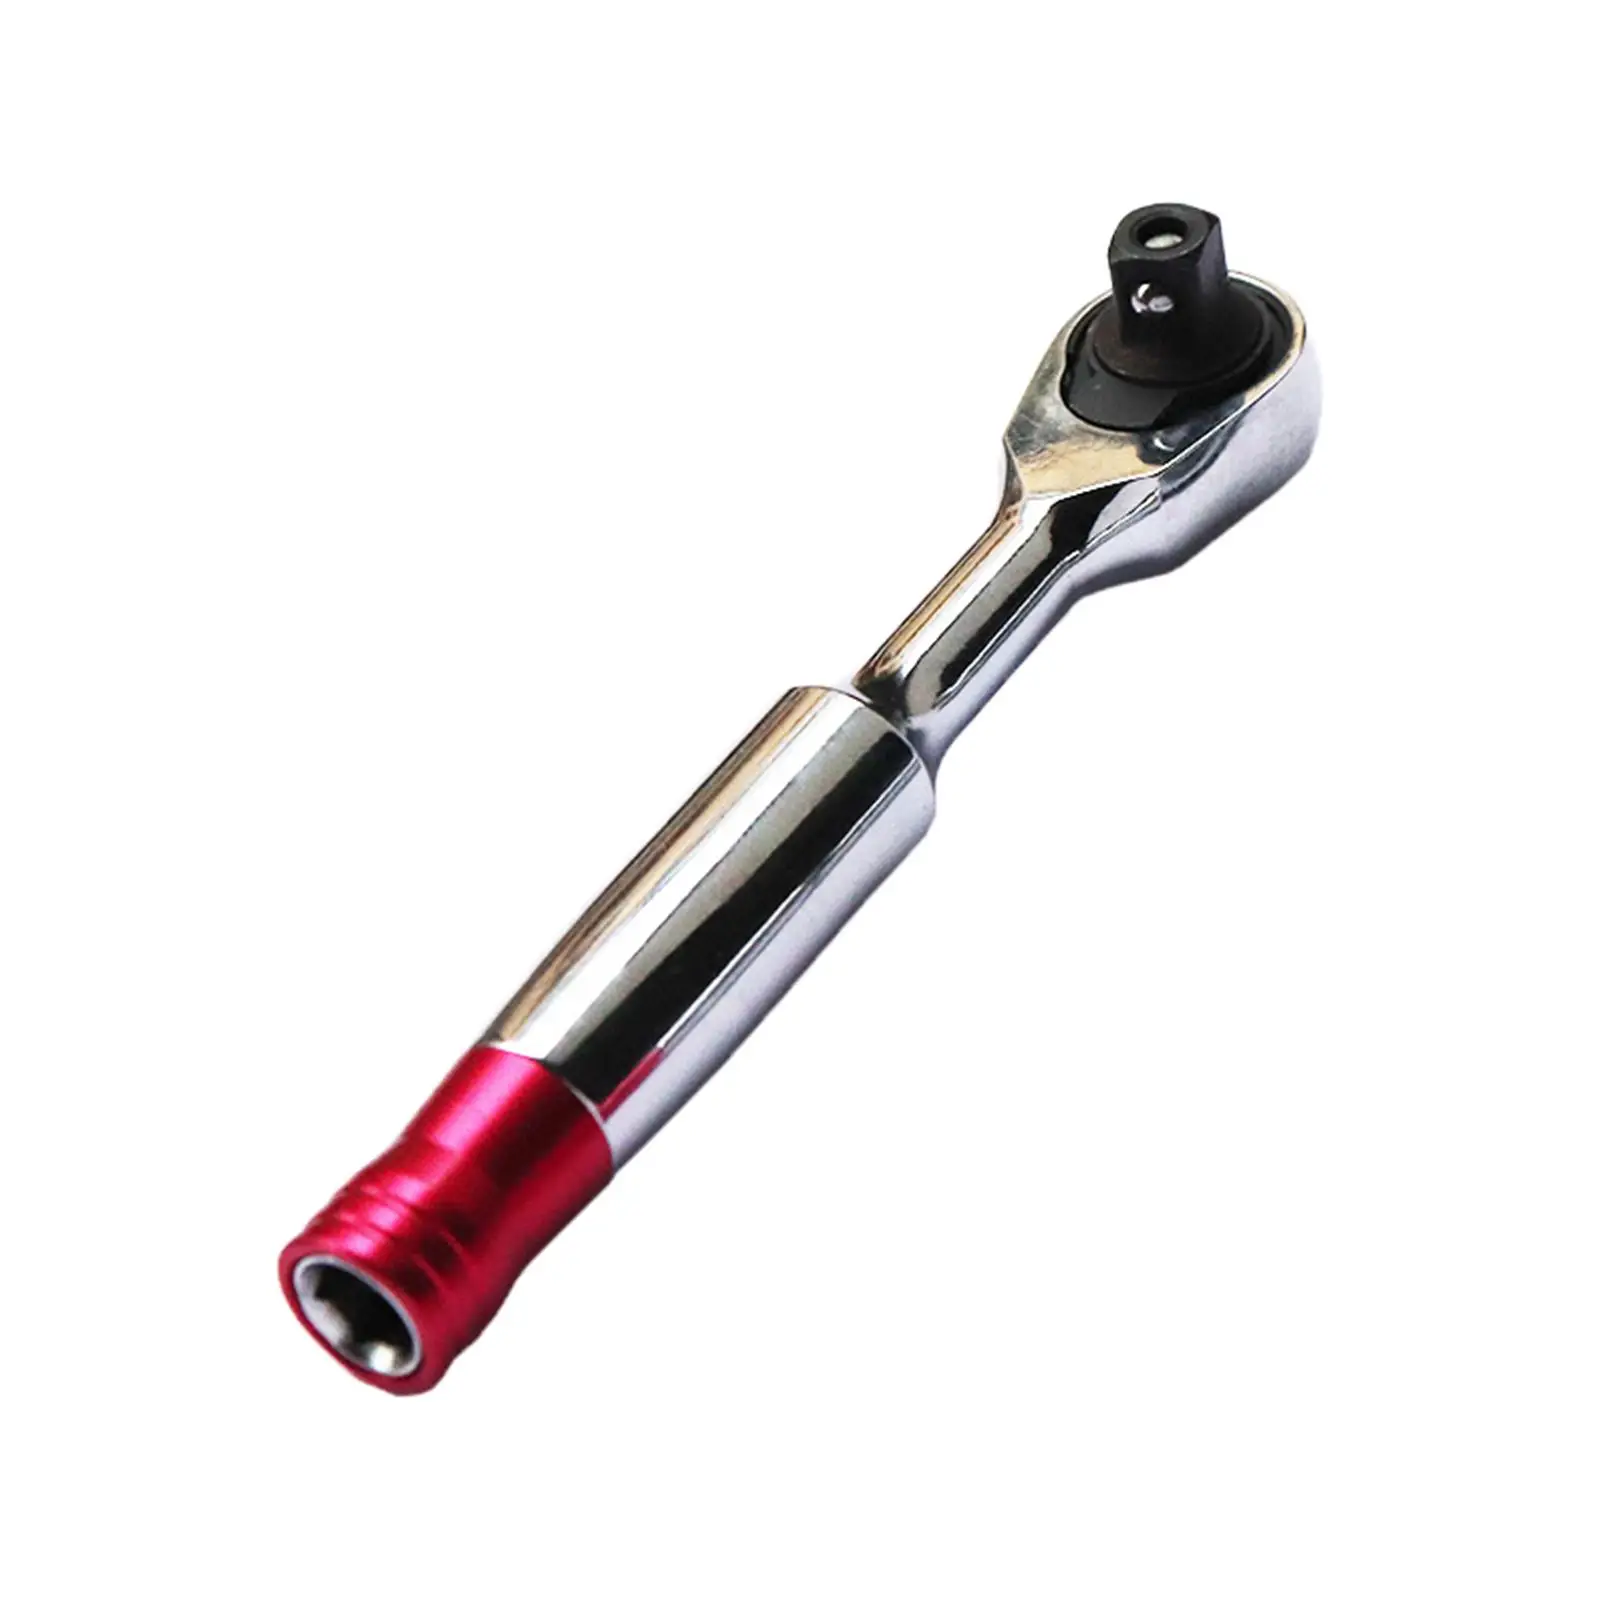 1/4 inch Drive Mini Sockets Wrench for Narrow Space 72 Toothed 85mm Screwdriver for Garage Workshop Metal/Wood Workers Repair